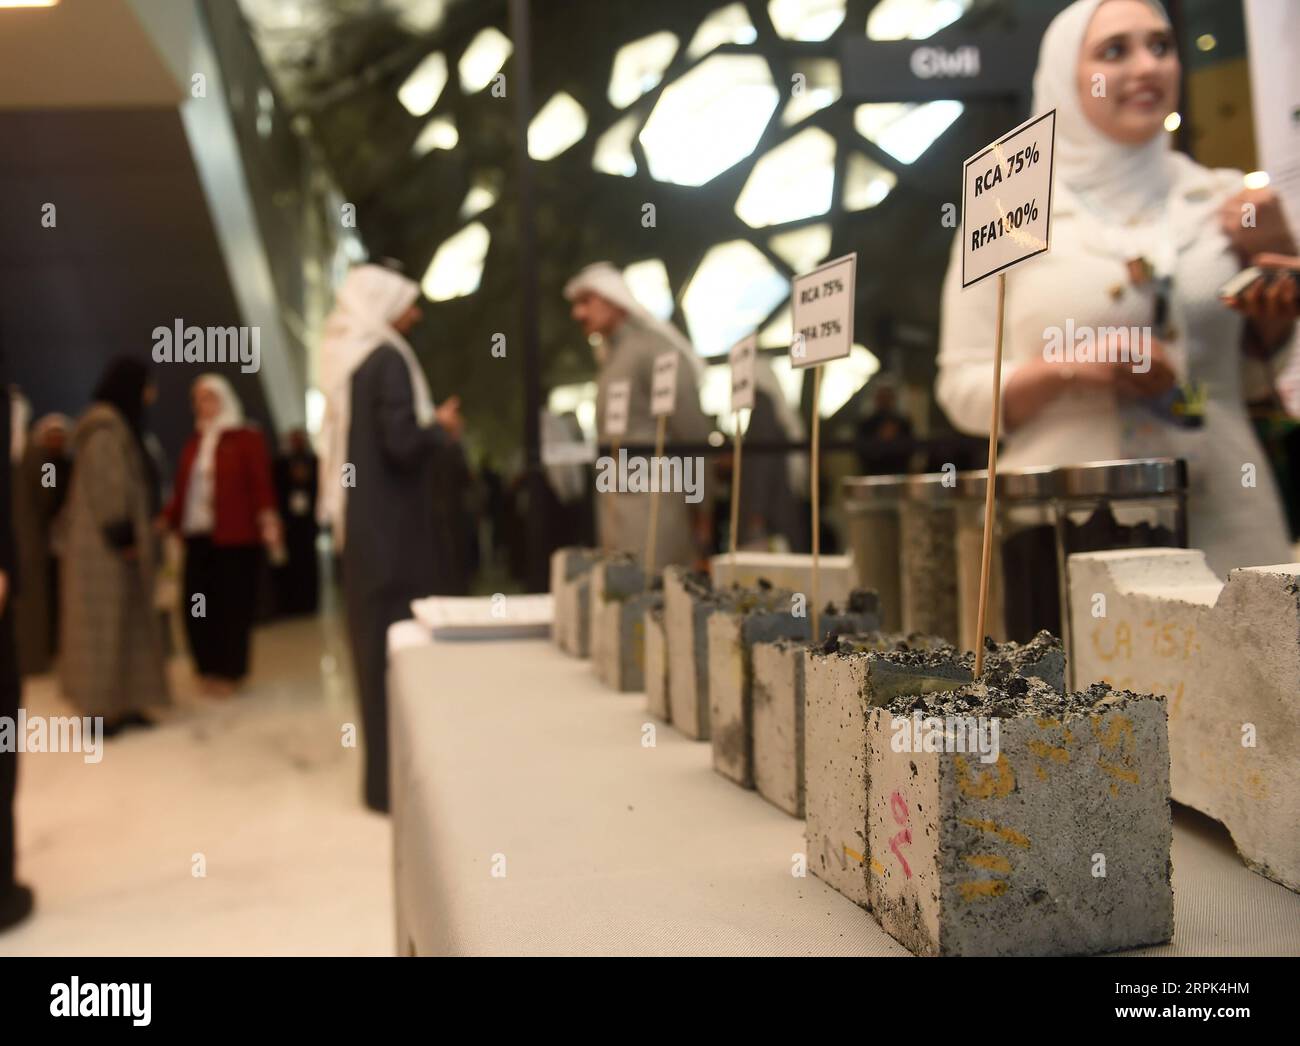 191229 -- KUWAIT CITY, Dec. 29, 2019 Xinhua -- Works are displayed at an engineering design exhibition in Kuwait City, Kuwait, Dec. 29, 2019. The exhibition was held here Sunday, which features 107 graduation projects of Kuwaiti students, and aims to encourage students to search for scientific information and to document their achievements. Photo by Asad/Xinhua KUWAIT-KUWAIT CITY-ENGINEERING DESIGN EXHIBITION PUBLICATIONxNOTxINxCHN Stock Photo